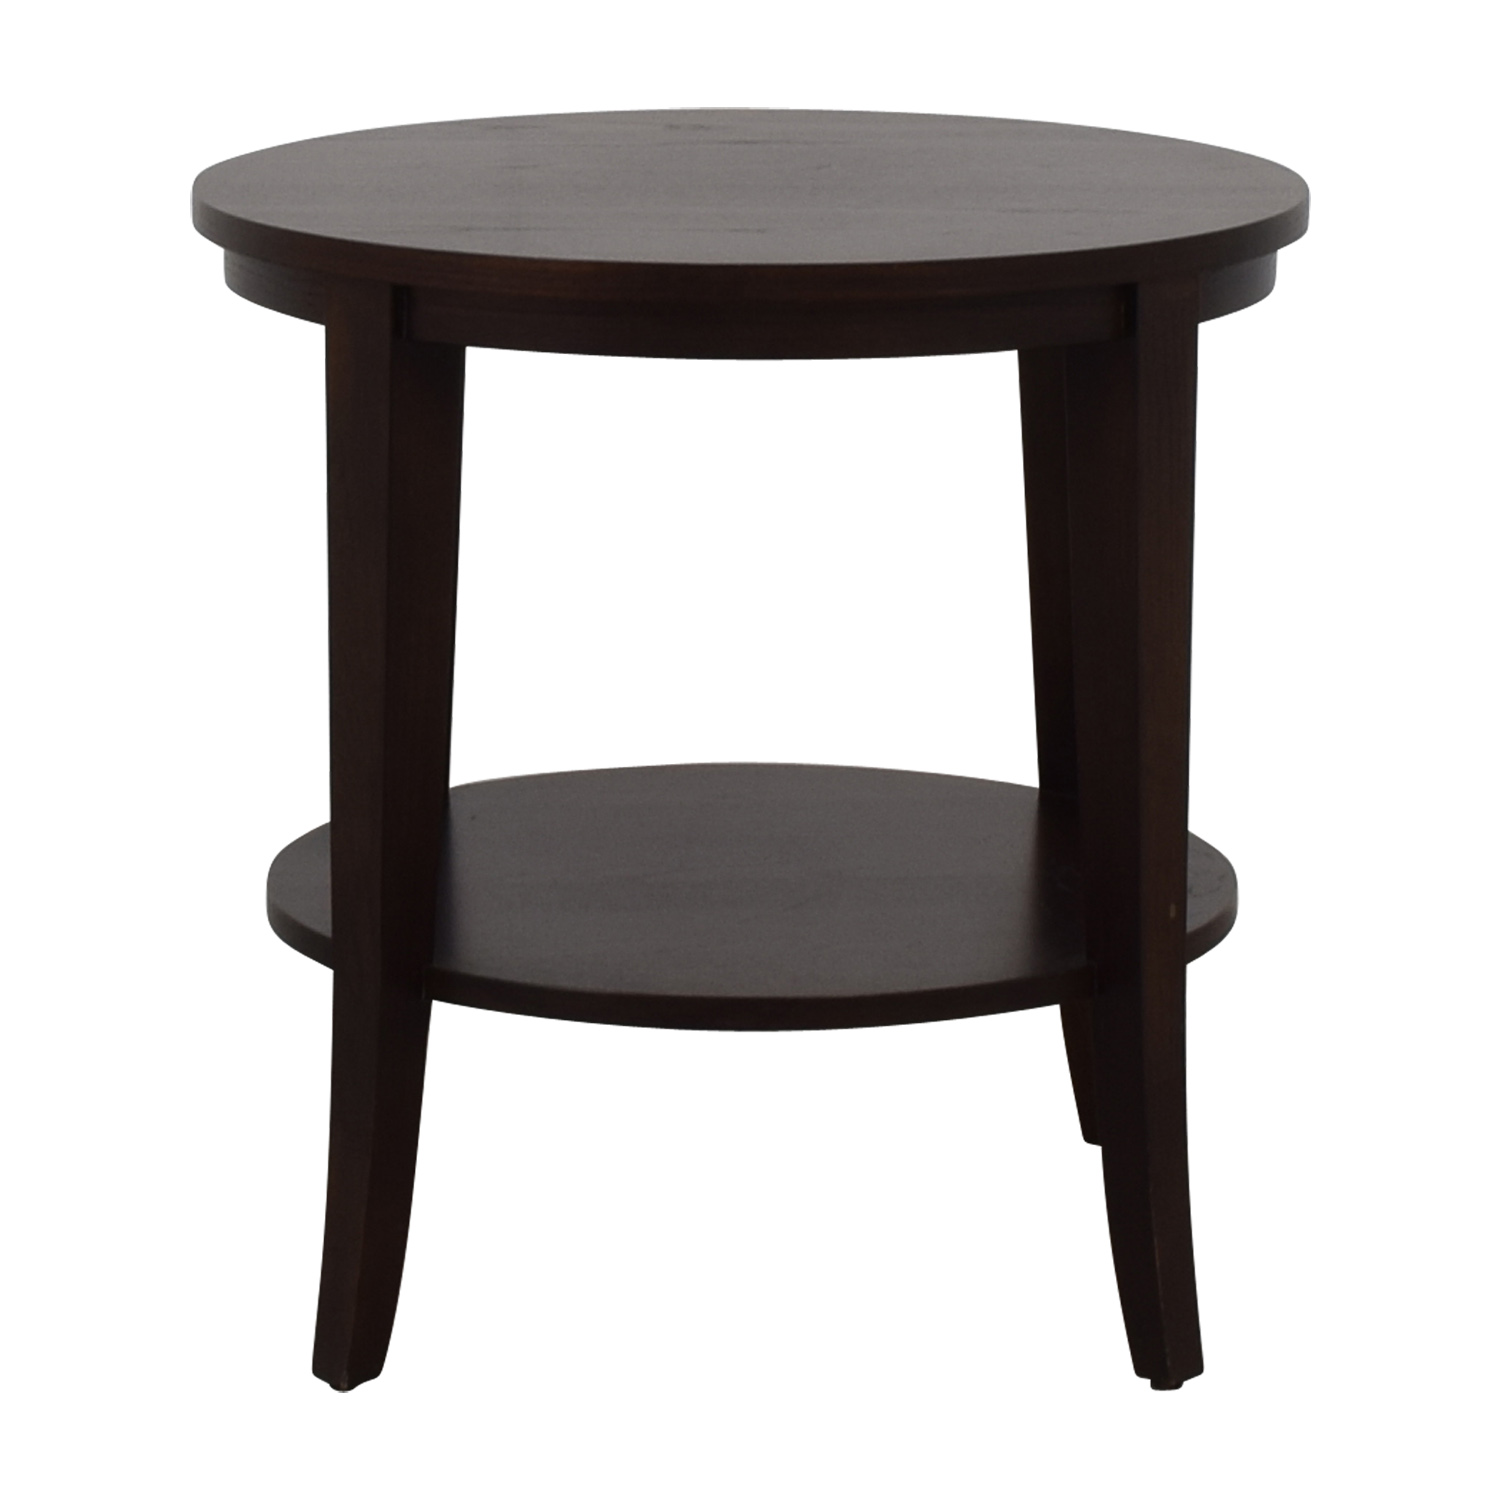 off ethan allen round wood accent table tables oak end glass for coffee linen napkins bulk next living room furniture best patio king bedding sets covers square black metal and